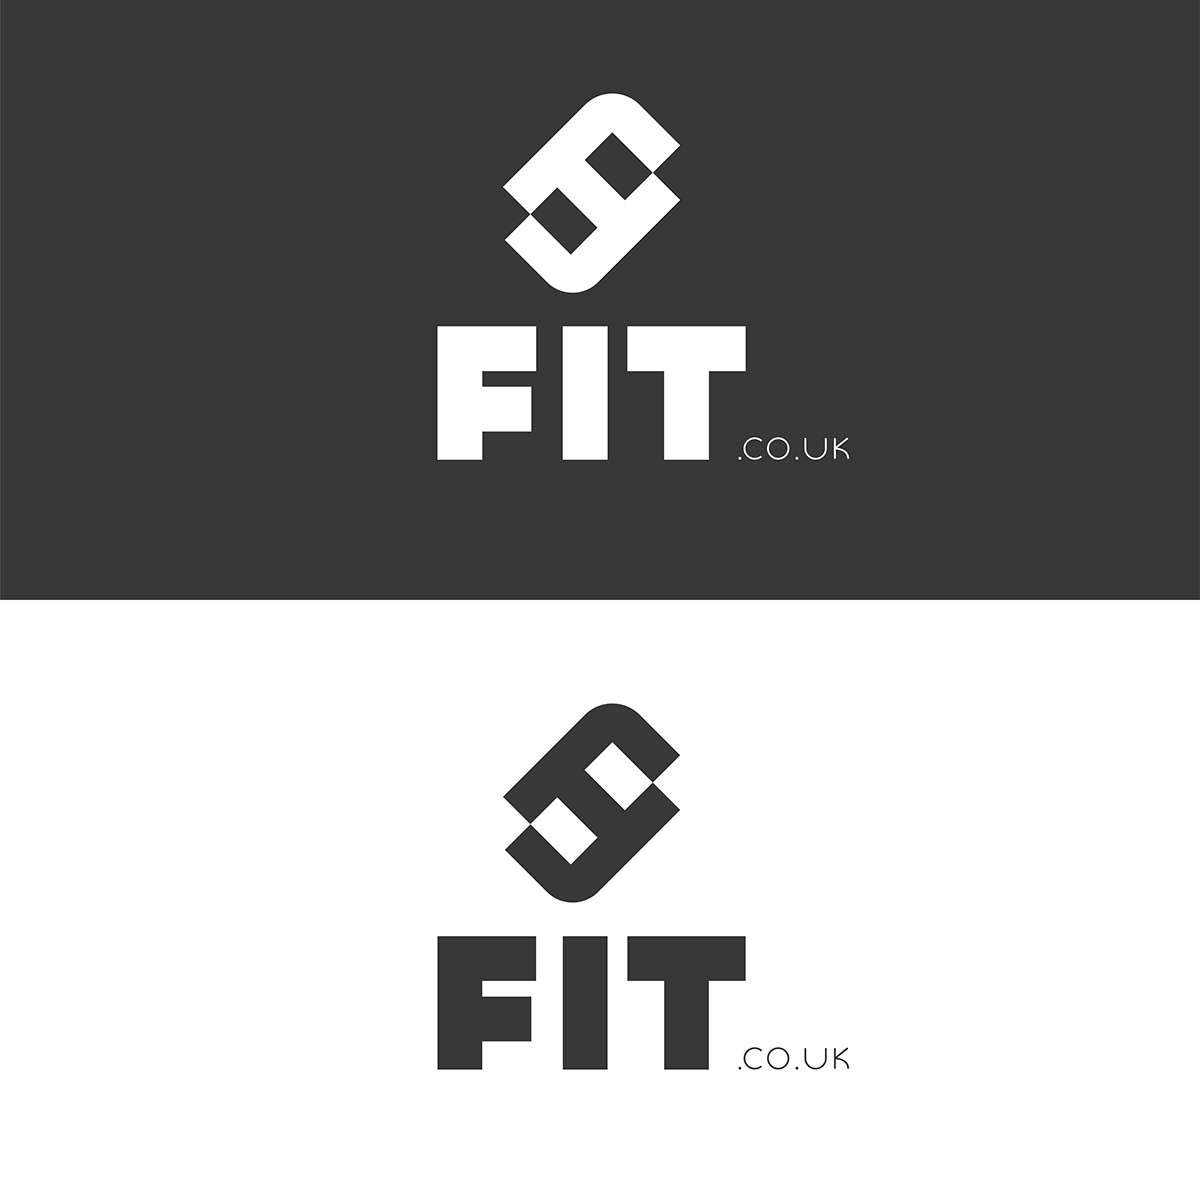 The monogram represent the word FIT in an ergonomic fashion which is unique as well.